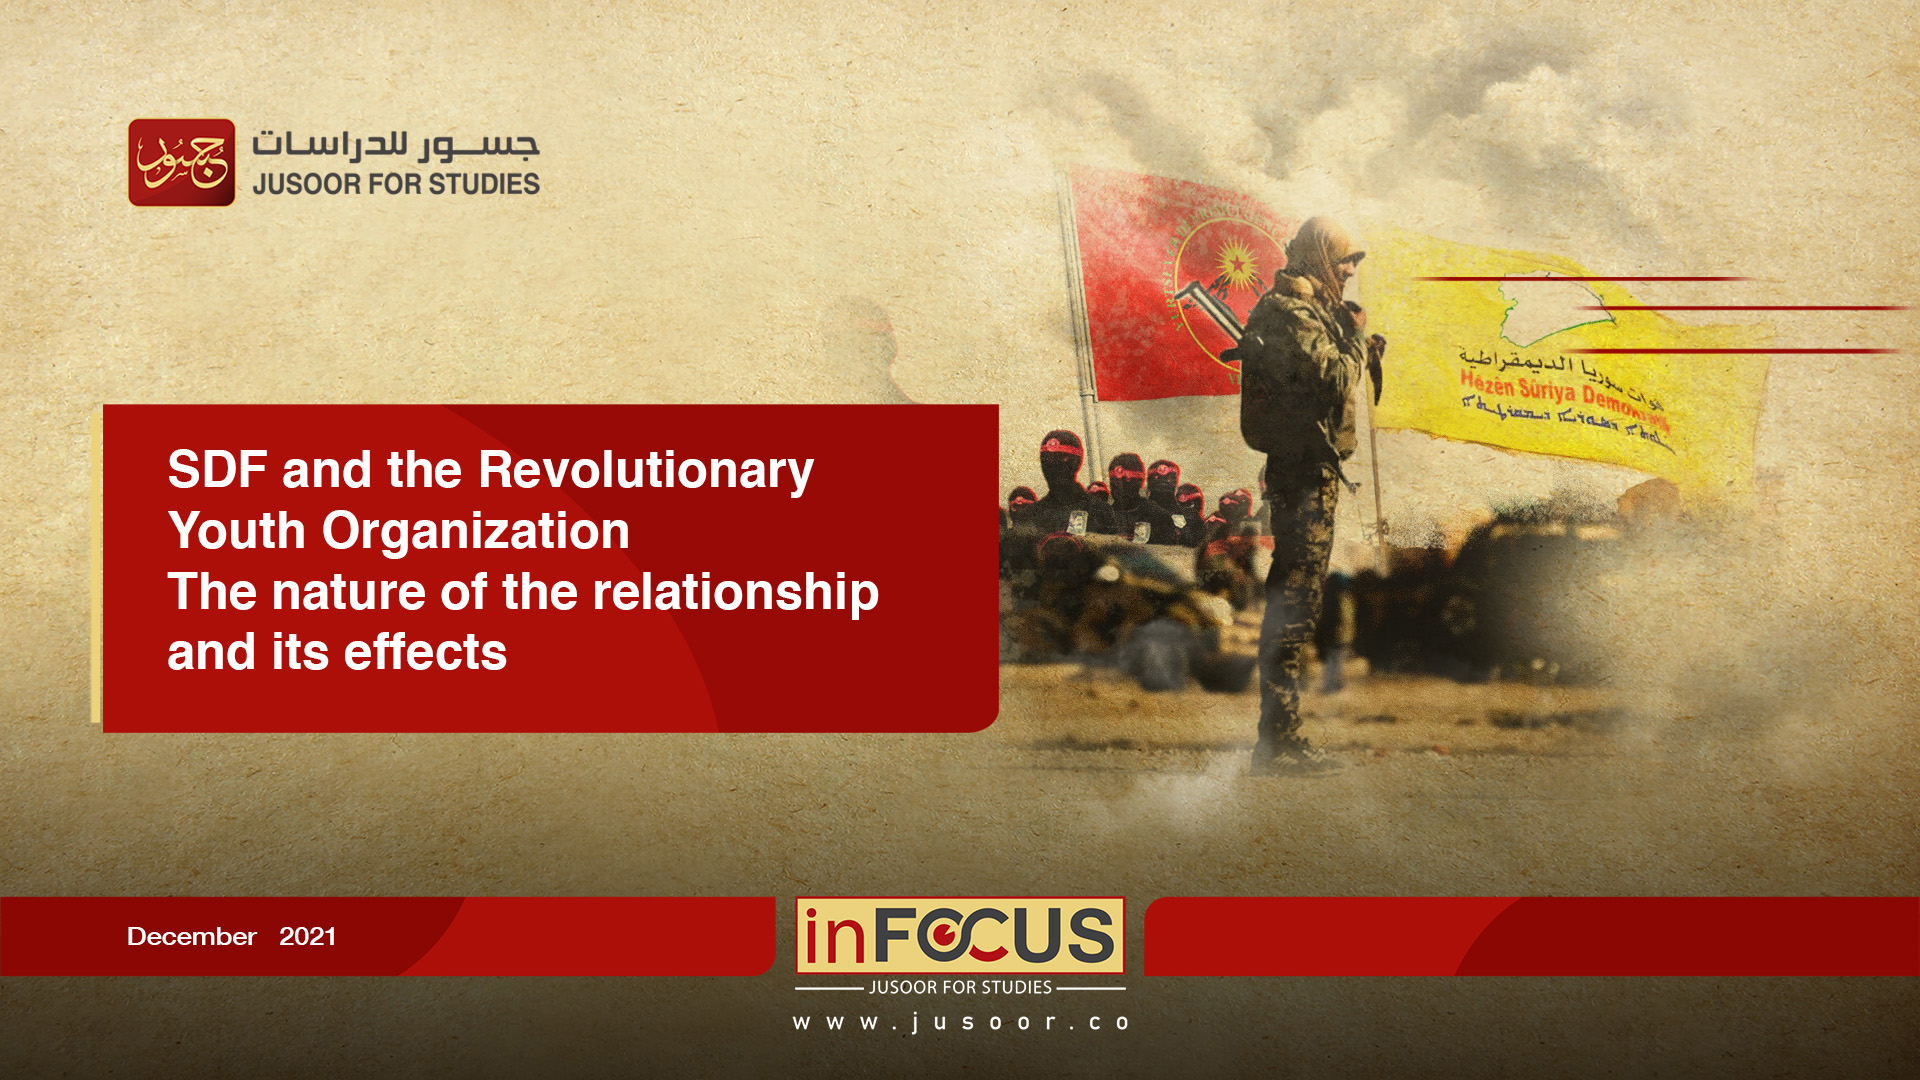 SDF and the Revolutionary Youth Organization The nature of the relationship and its effects